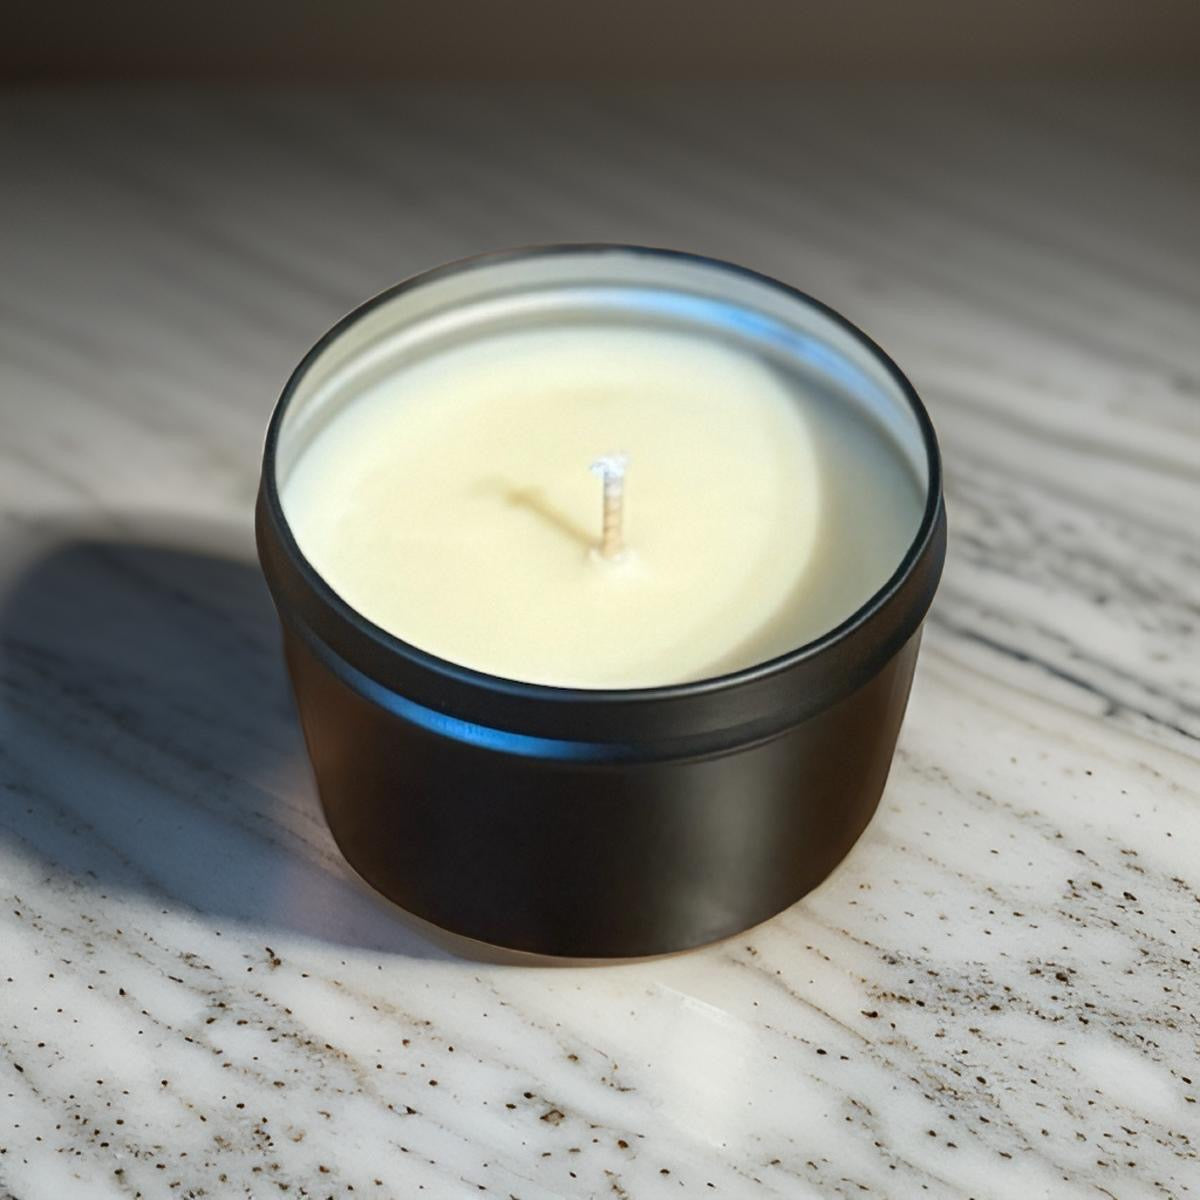 Massage candle soy wax with peach kernel and jojoba oil